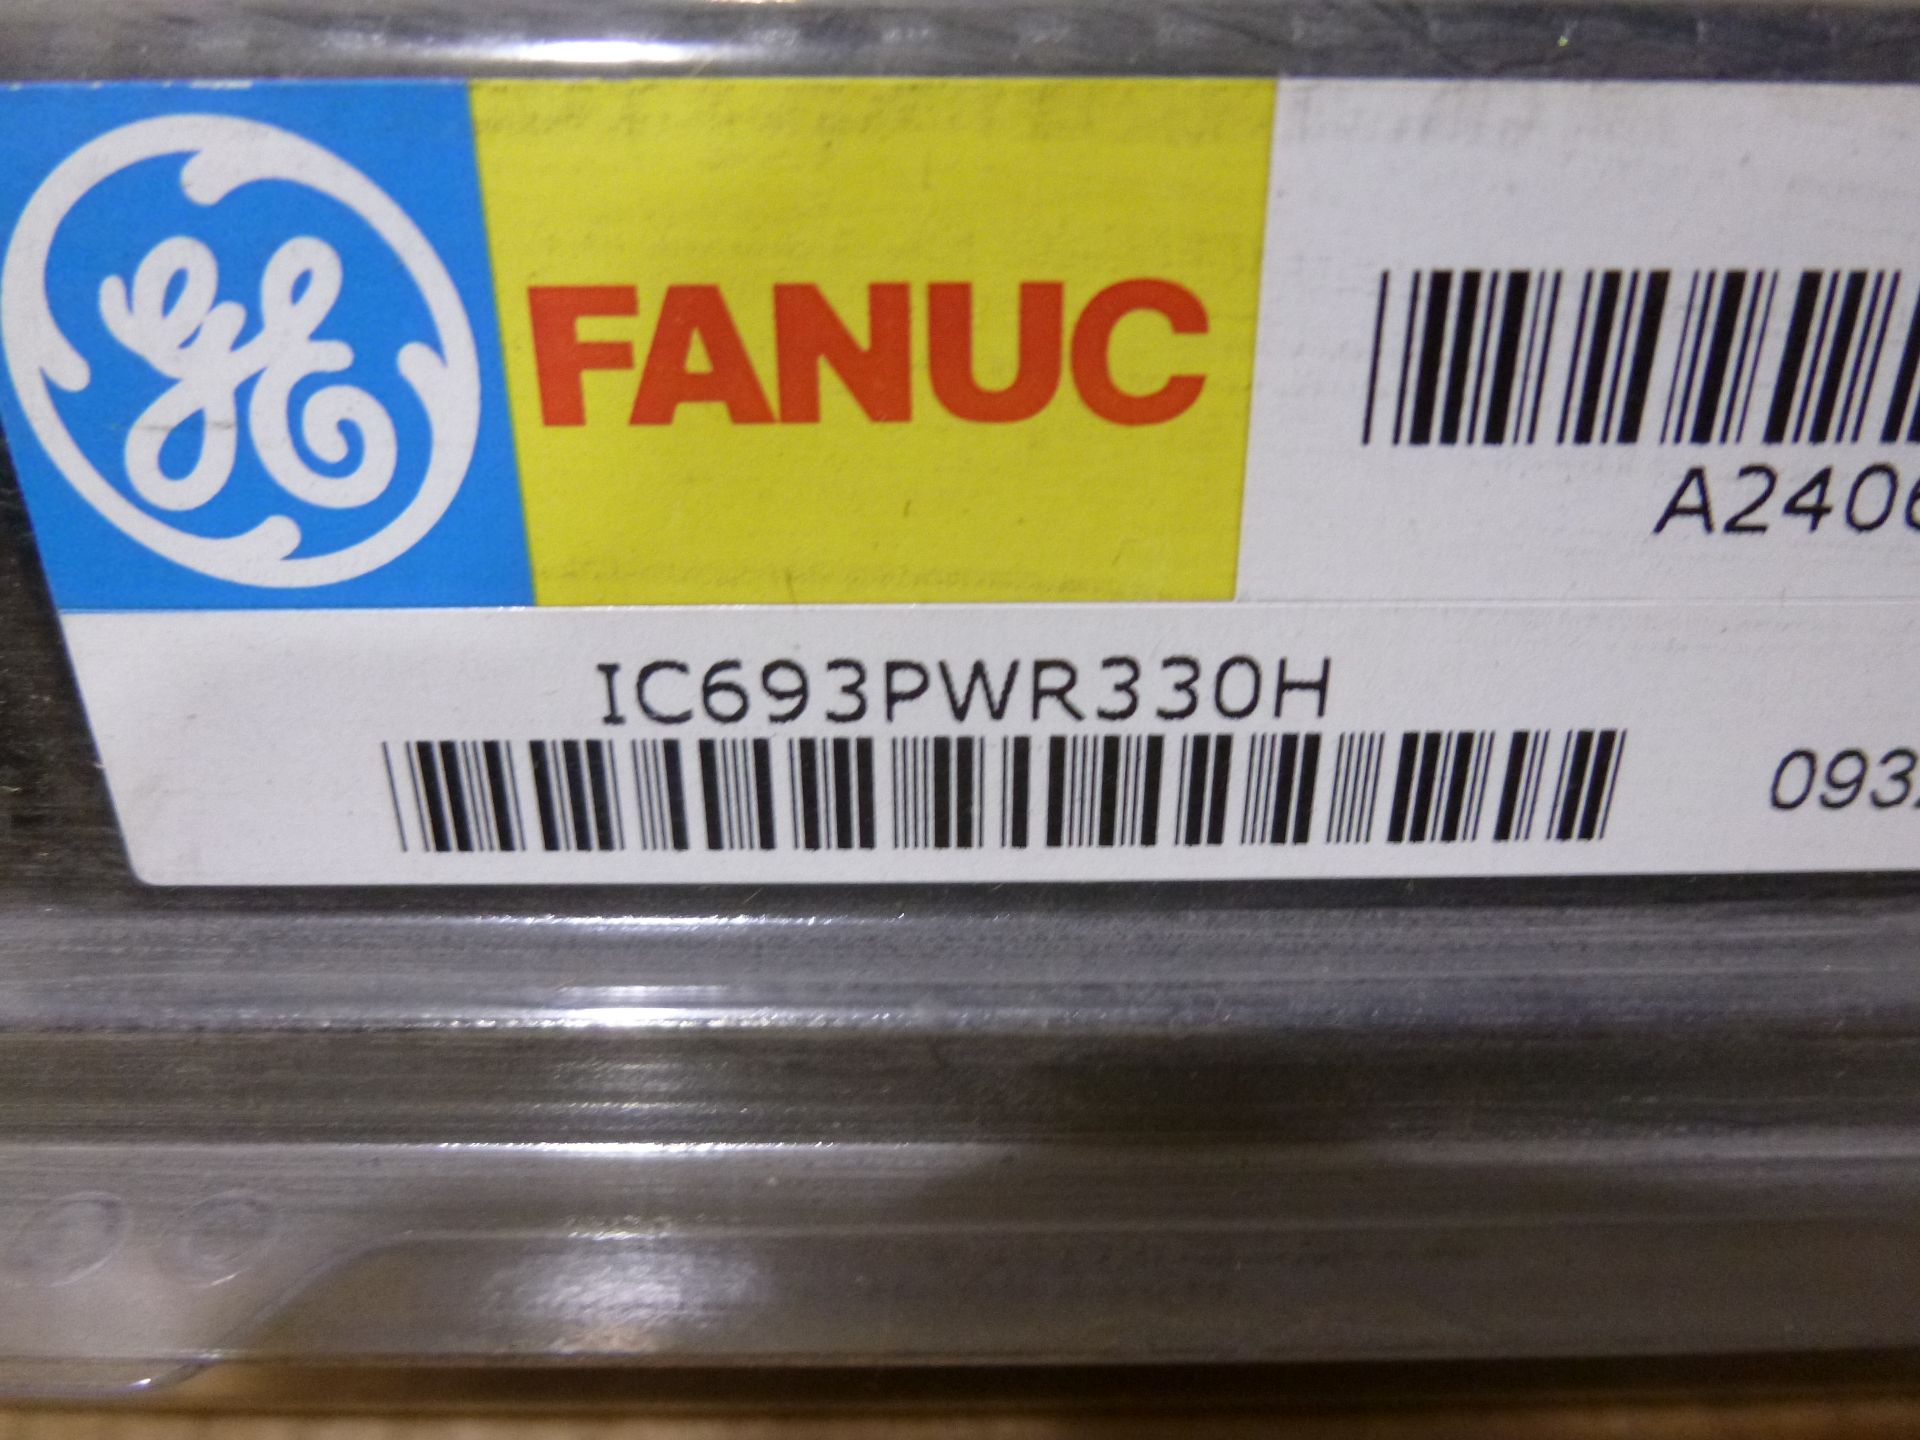 Qty 2 GE Fanuc IC693PWR330H, as always with Brolyn LLC auctions, all lots can be picked up from - Image 2 of 2